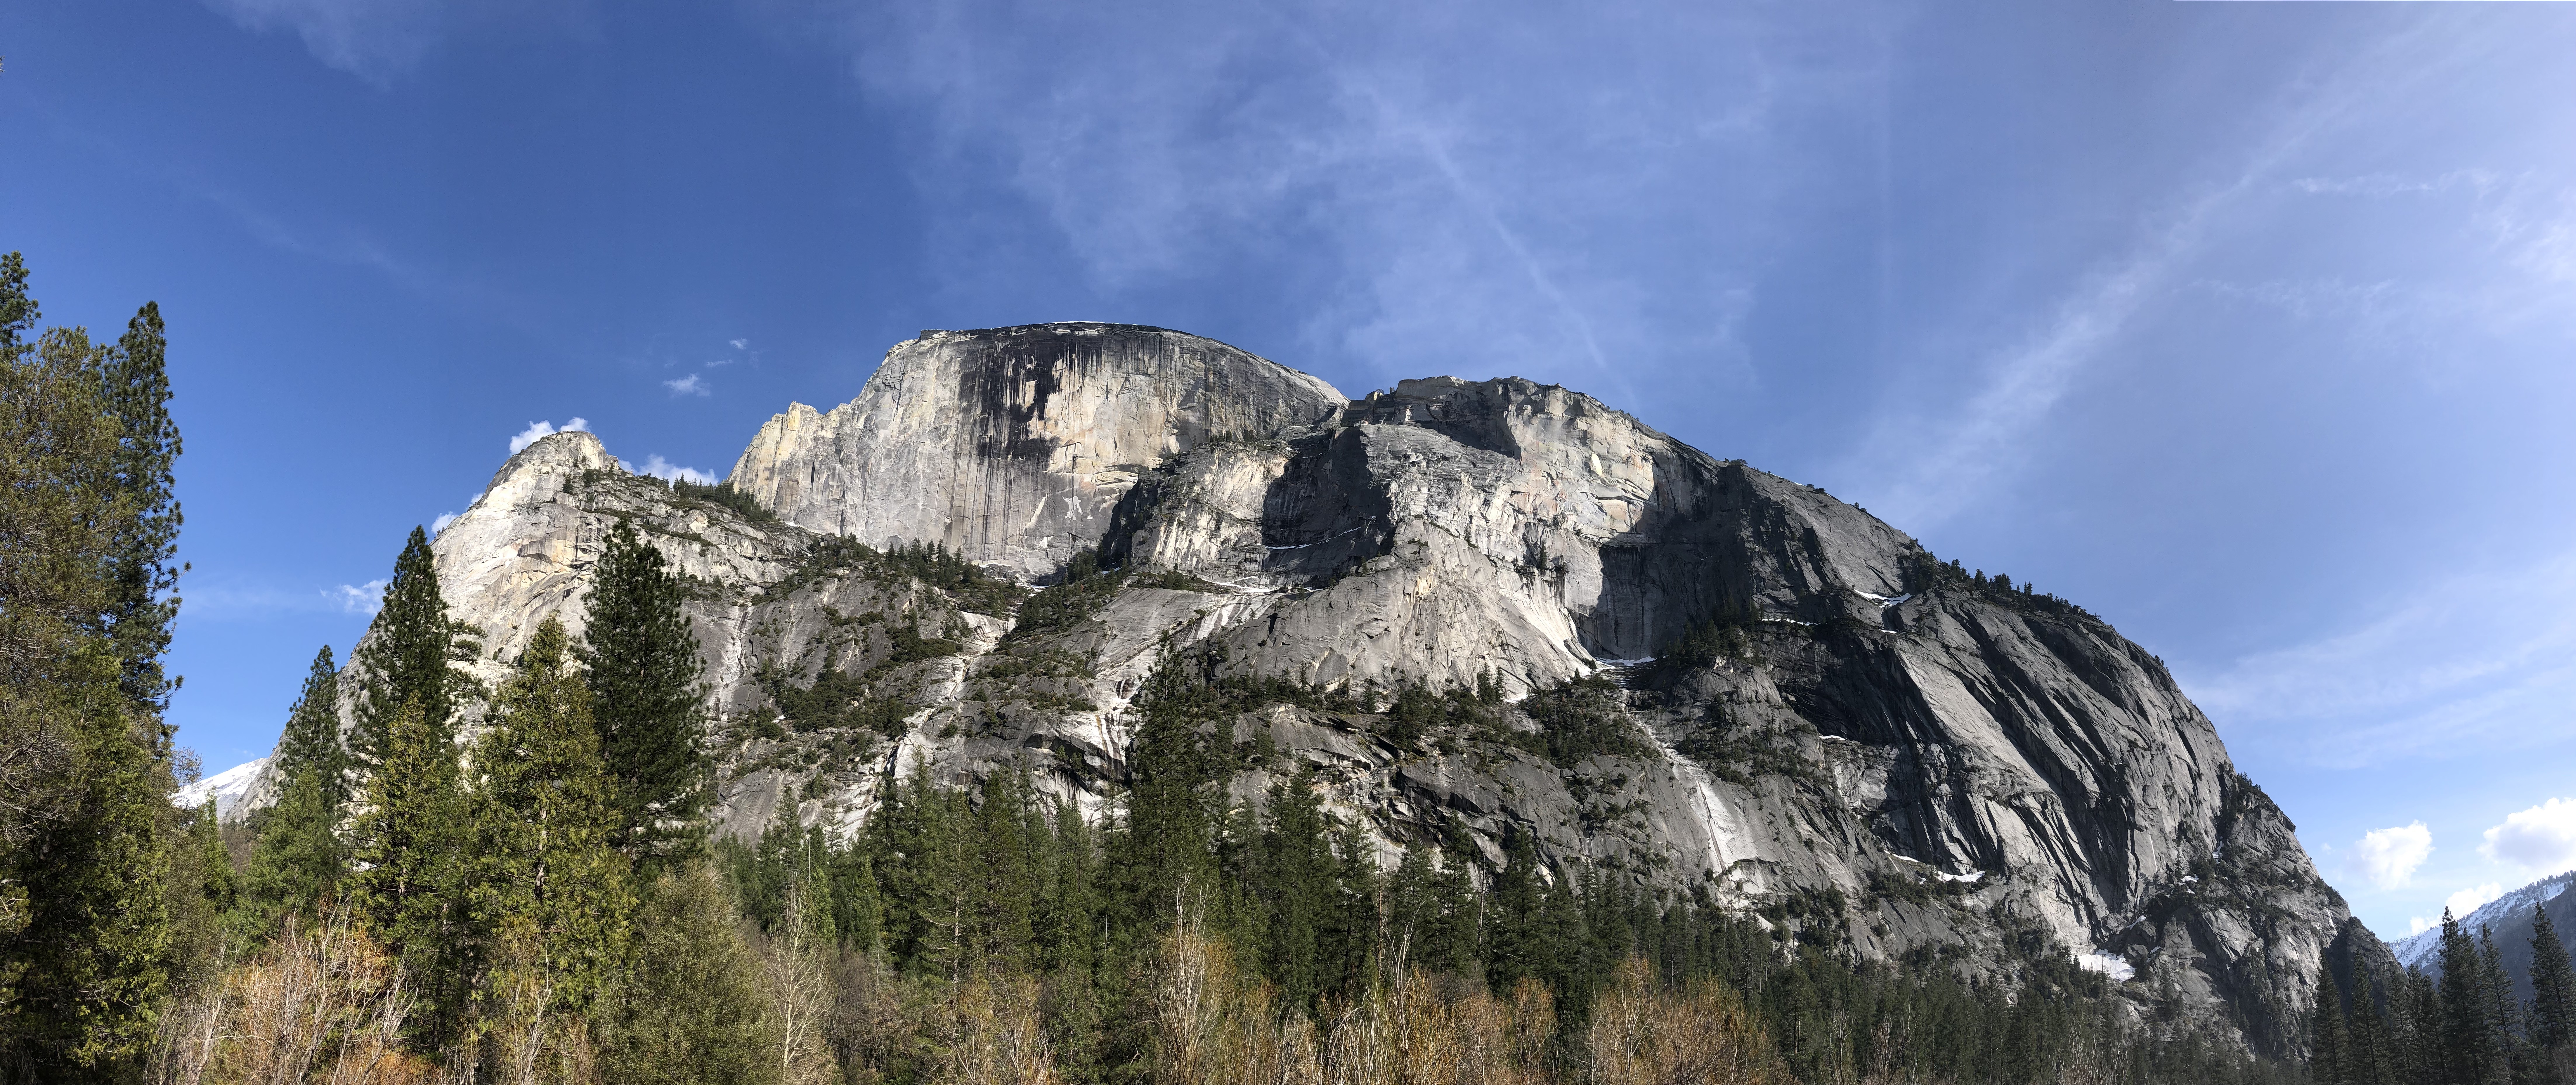 a view of the broad side of Half Dome from Yosemite Valley